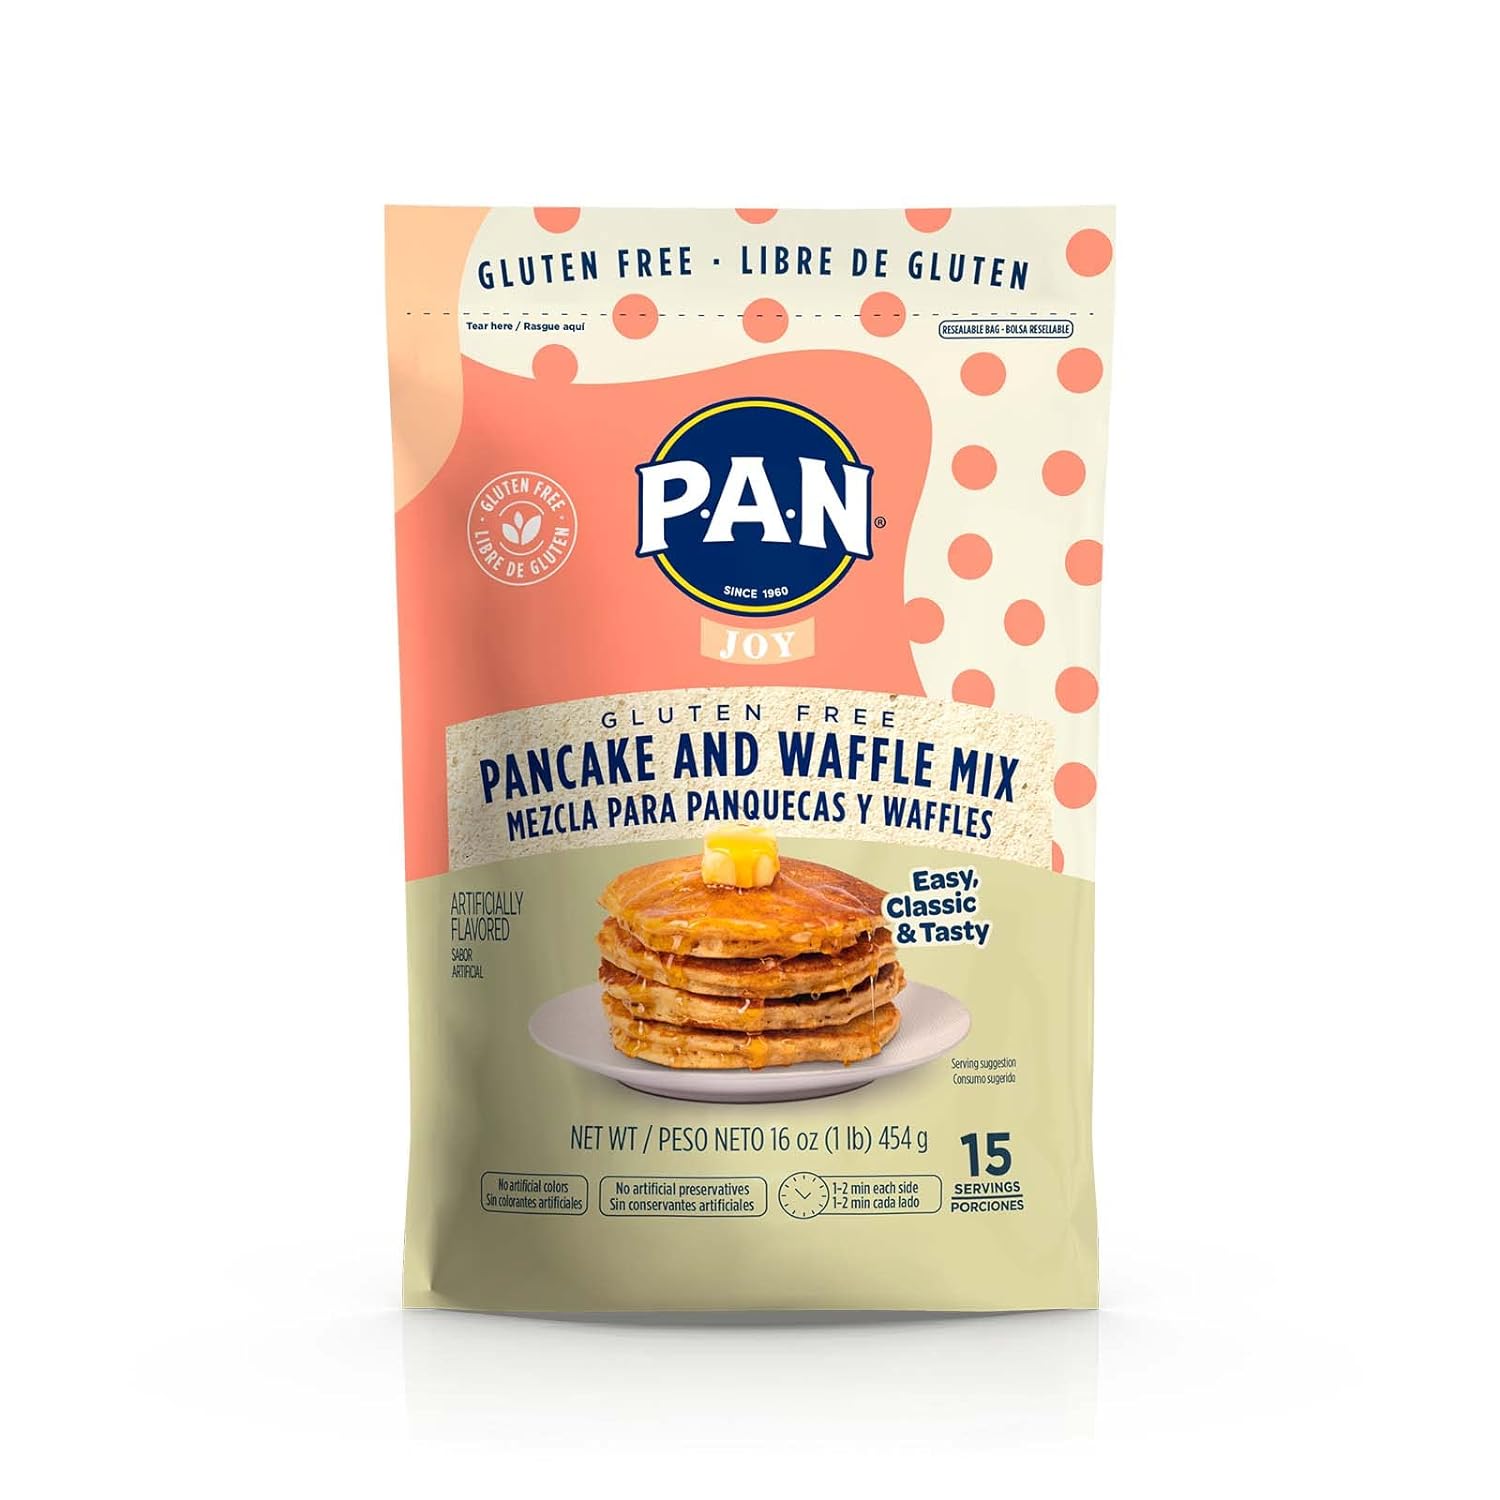 P.A.N Pancake and Waffle Mix – Gluten Free 1 lb. (Pack of 1)